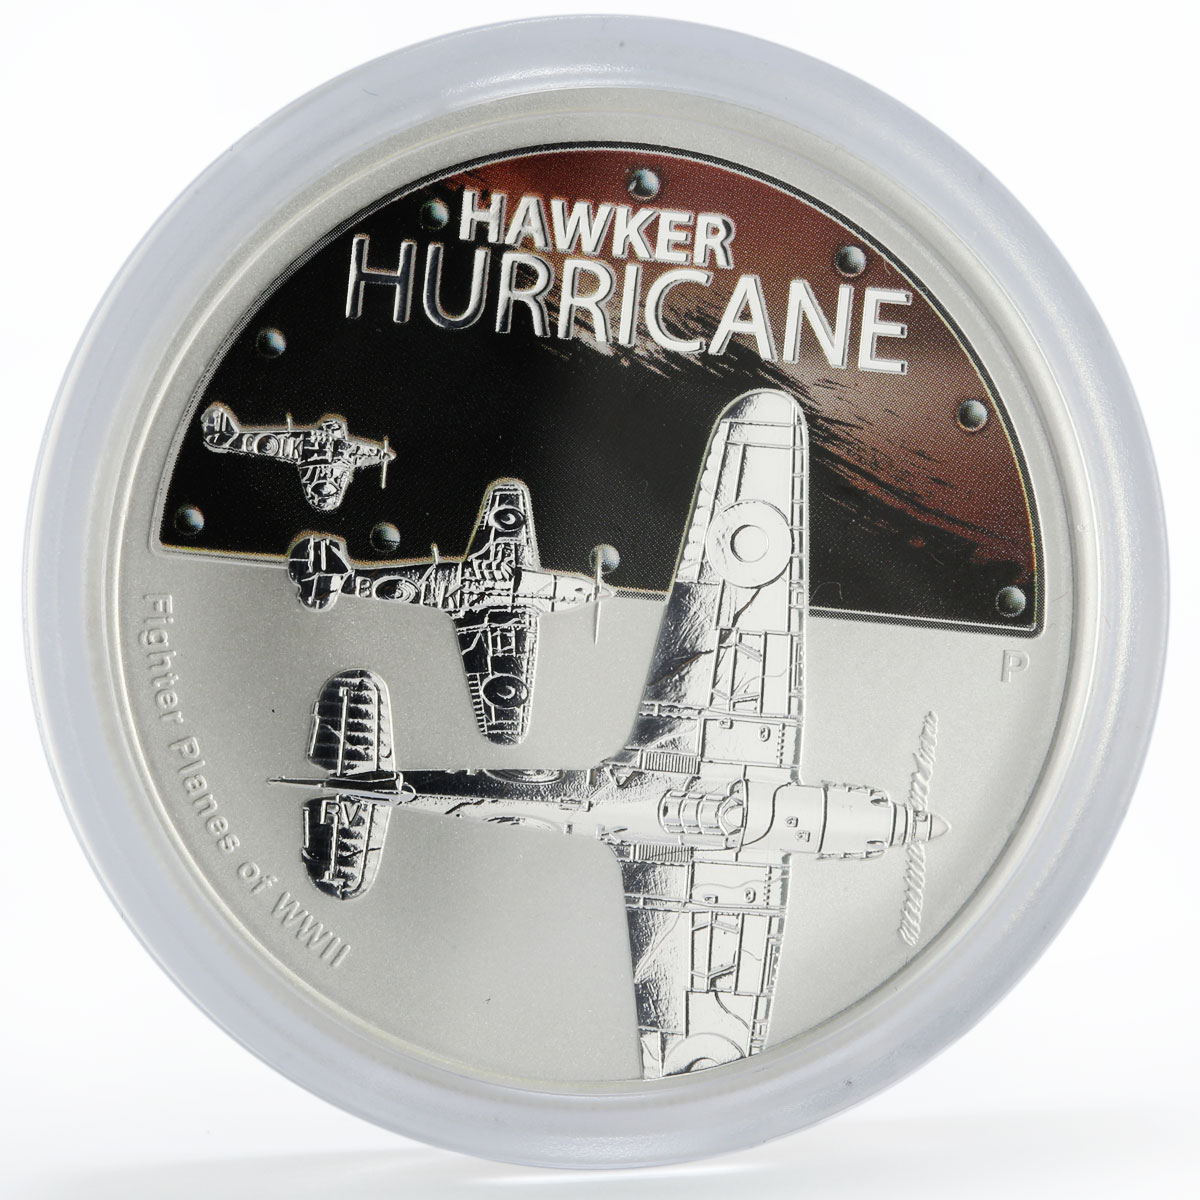 Tuvalu 1 dollar Fighters of WWII Hawker Hurricane Plane silver coin 2008